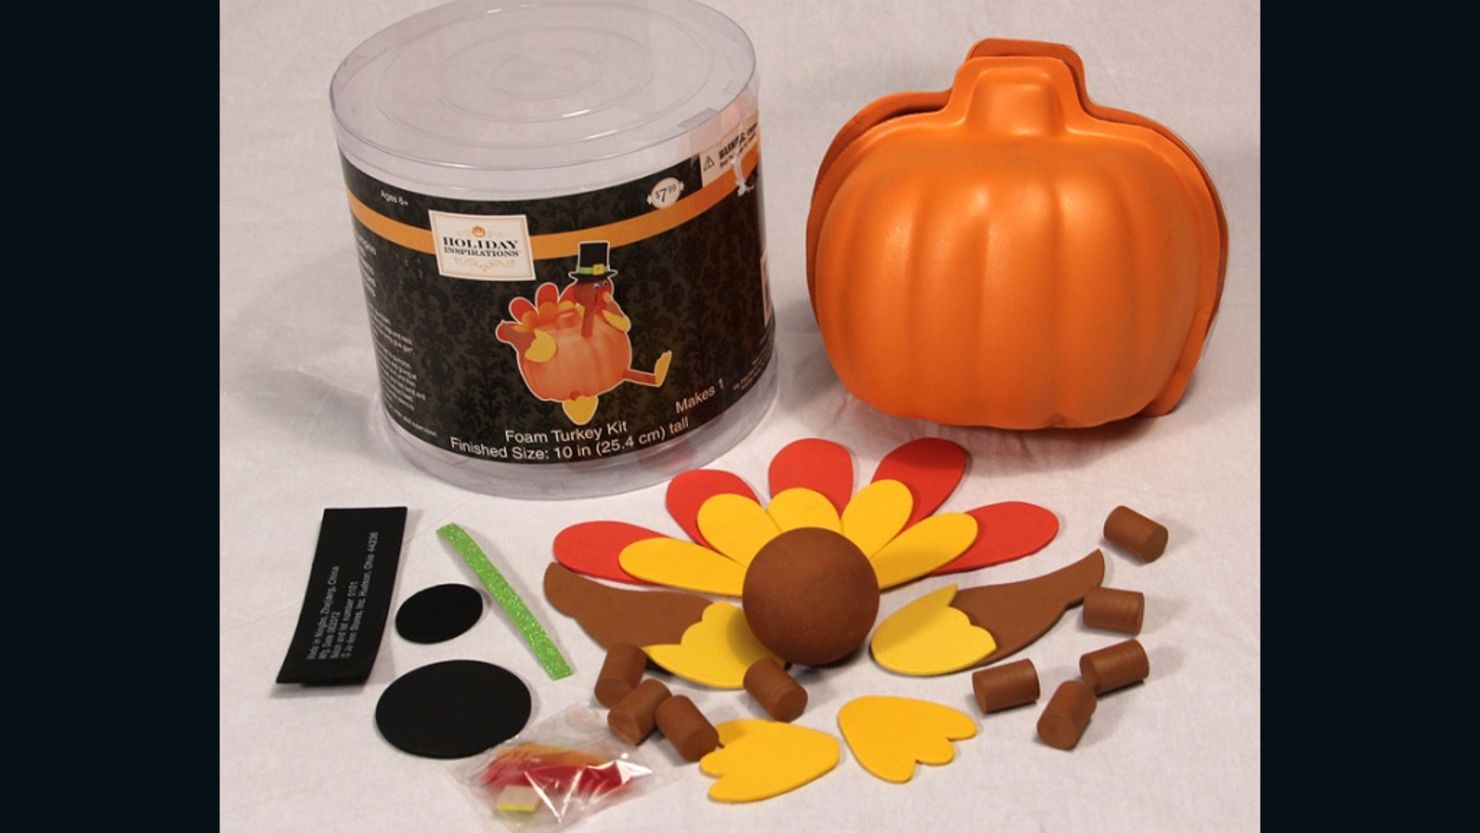 The Consumer Product Safety Commission says magnets in this Jo-Ann Fabrics foam turkey kit could pose a hazard. 